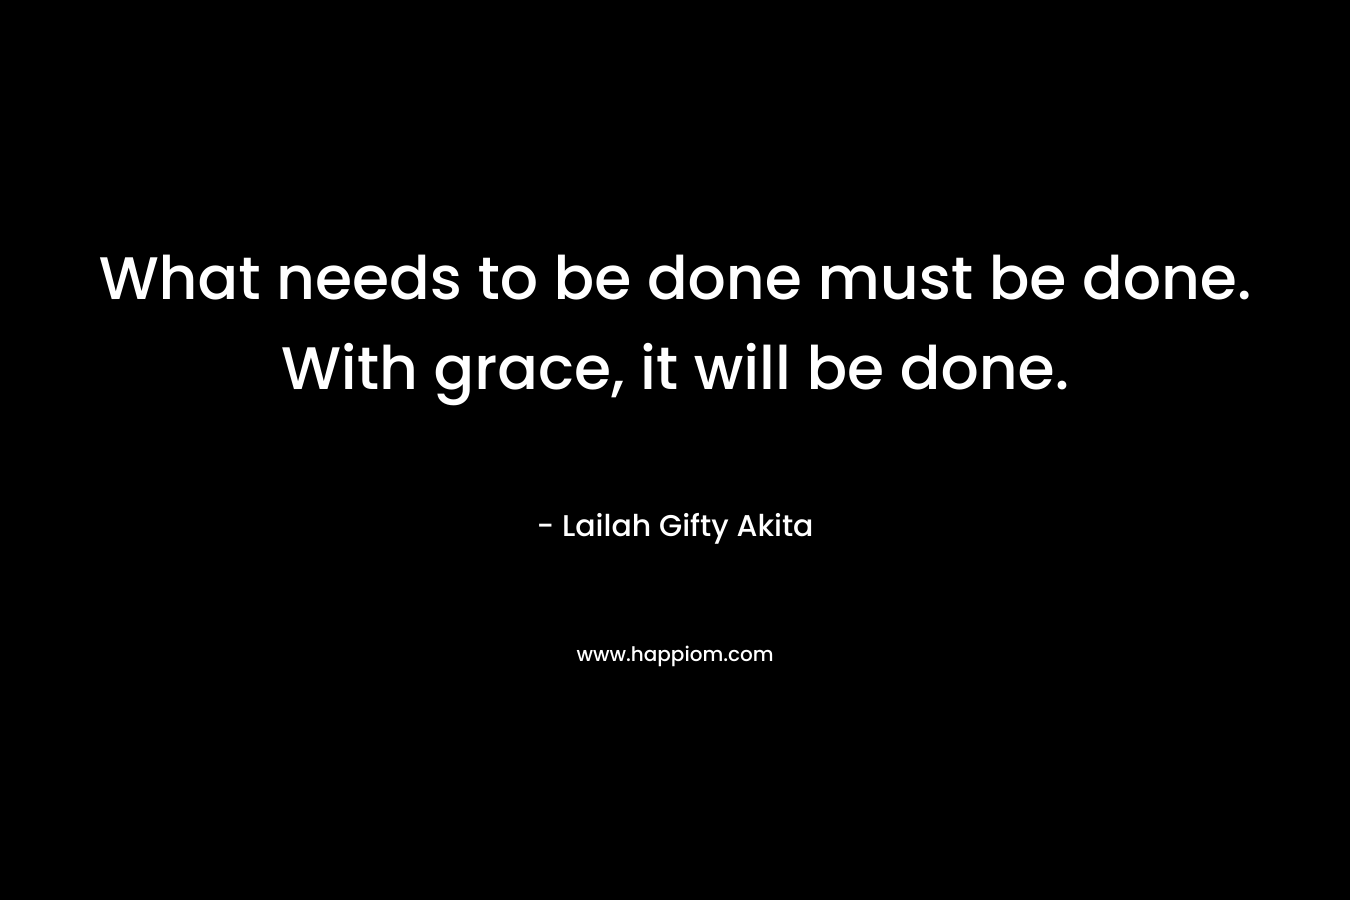 What needs to be done must be done. With grace, it will be done.